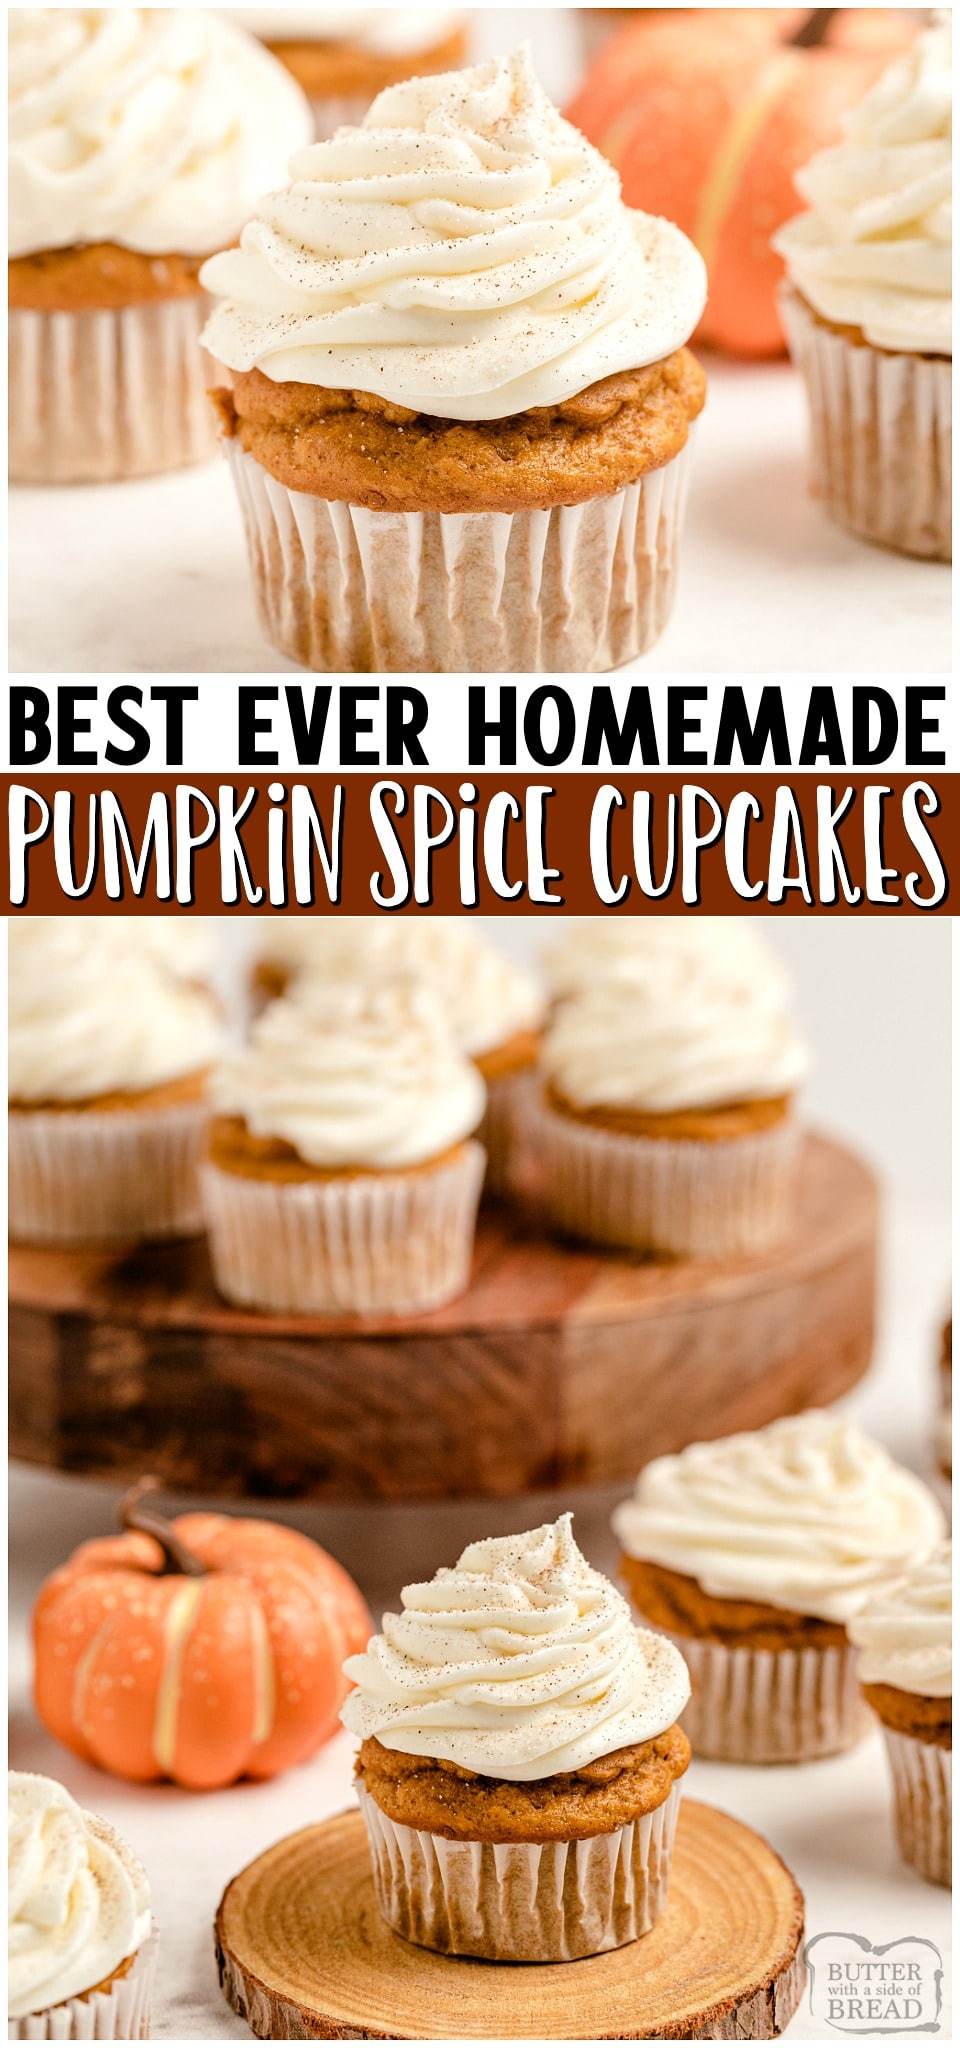 Pumpkin Spice Cupcakes with Cream Cheese Frosting are the perfect little treats for celebrating Fall! Easy recipe that starts with yellow cake mix and yields soft, moist perfectly spiced pumpkin cupcakes! #cupcakes #pumpkin #pumpkinspice #psl #baking #dessert #easyrecipe from BUTTER WITH A SIDE OF BREAD